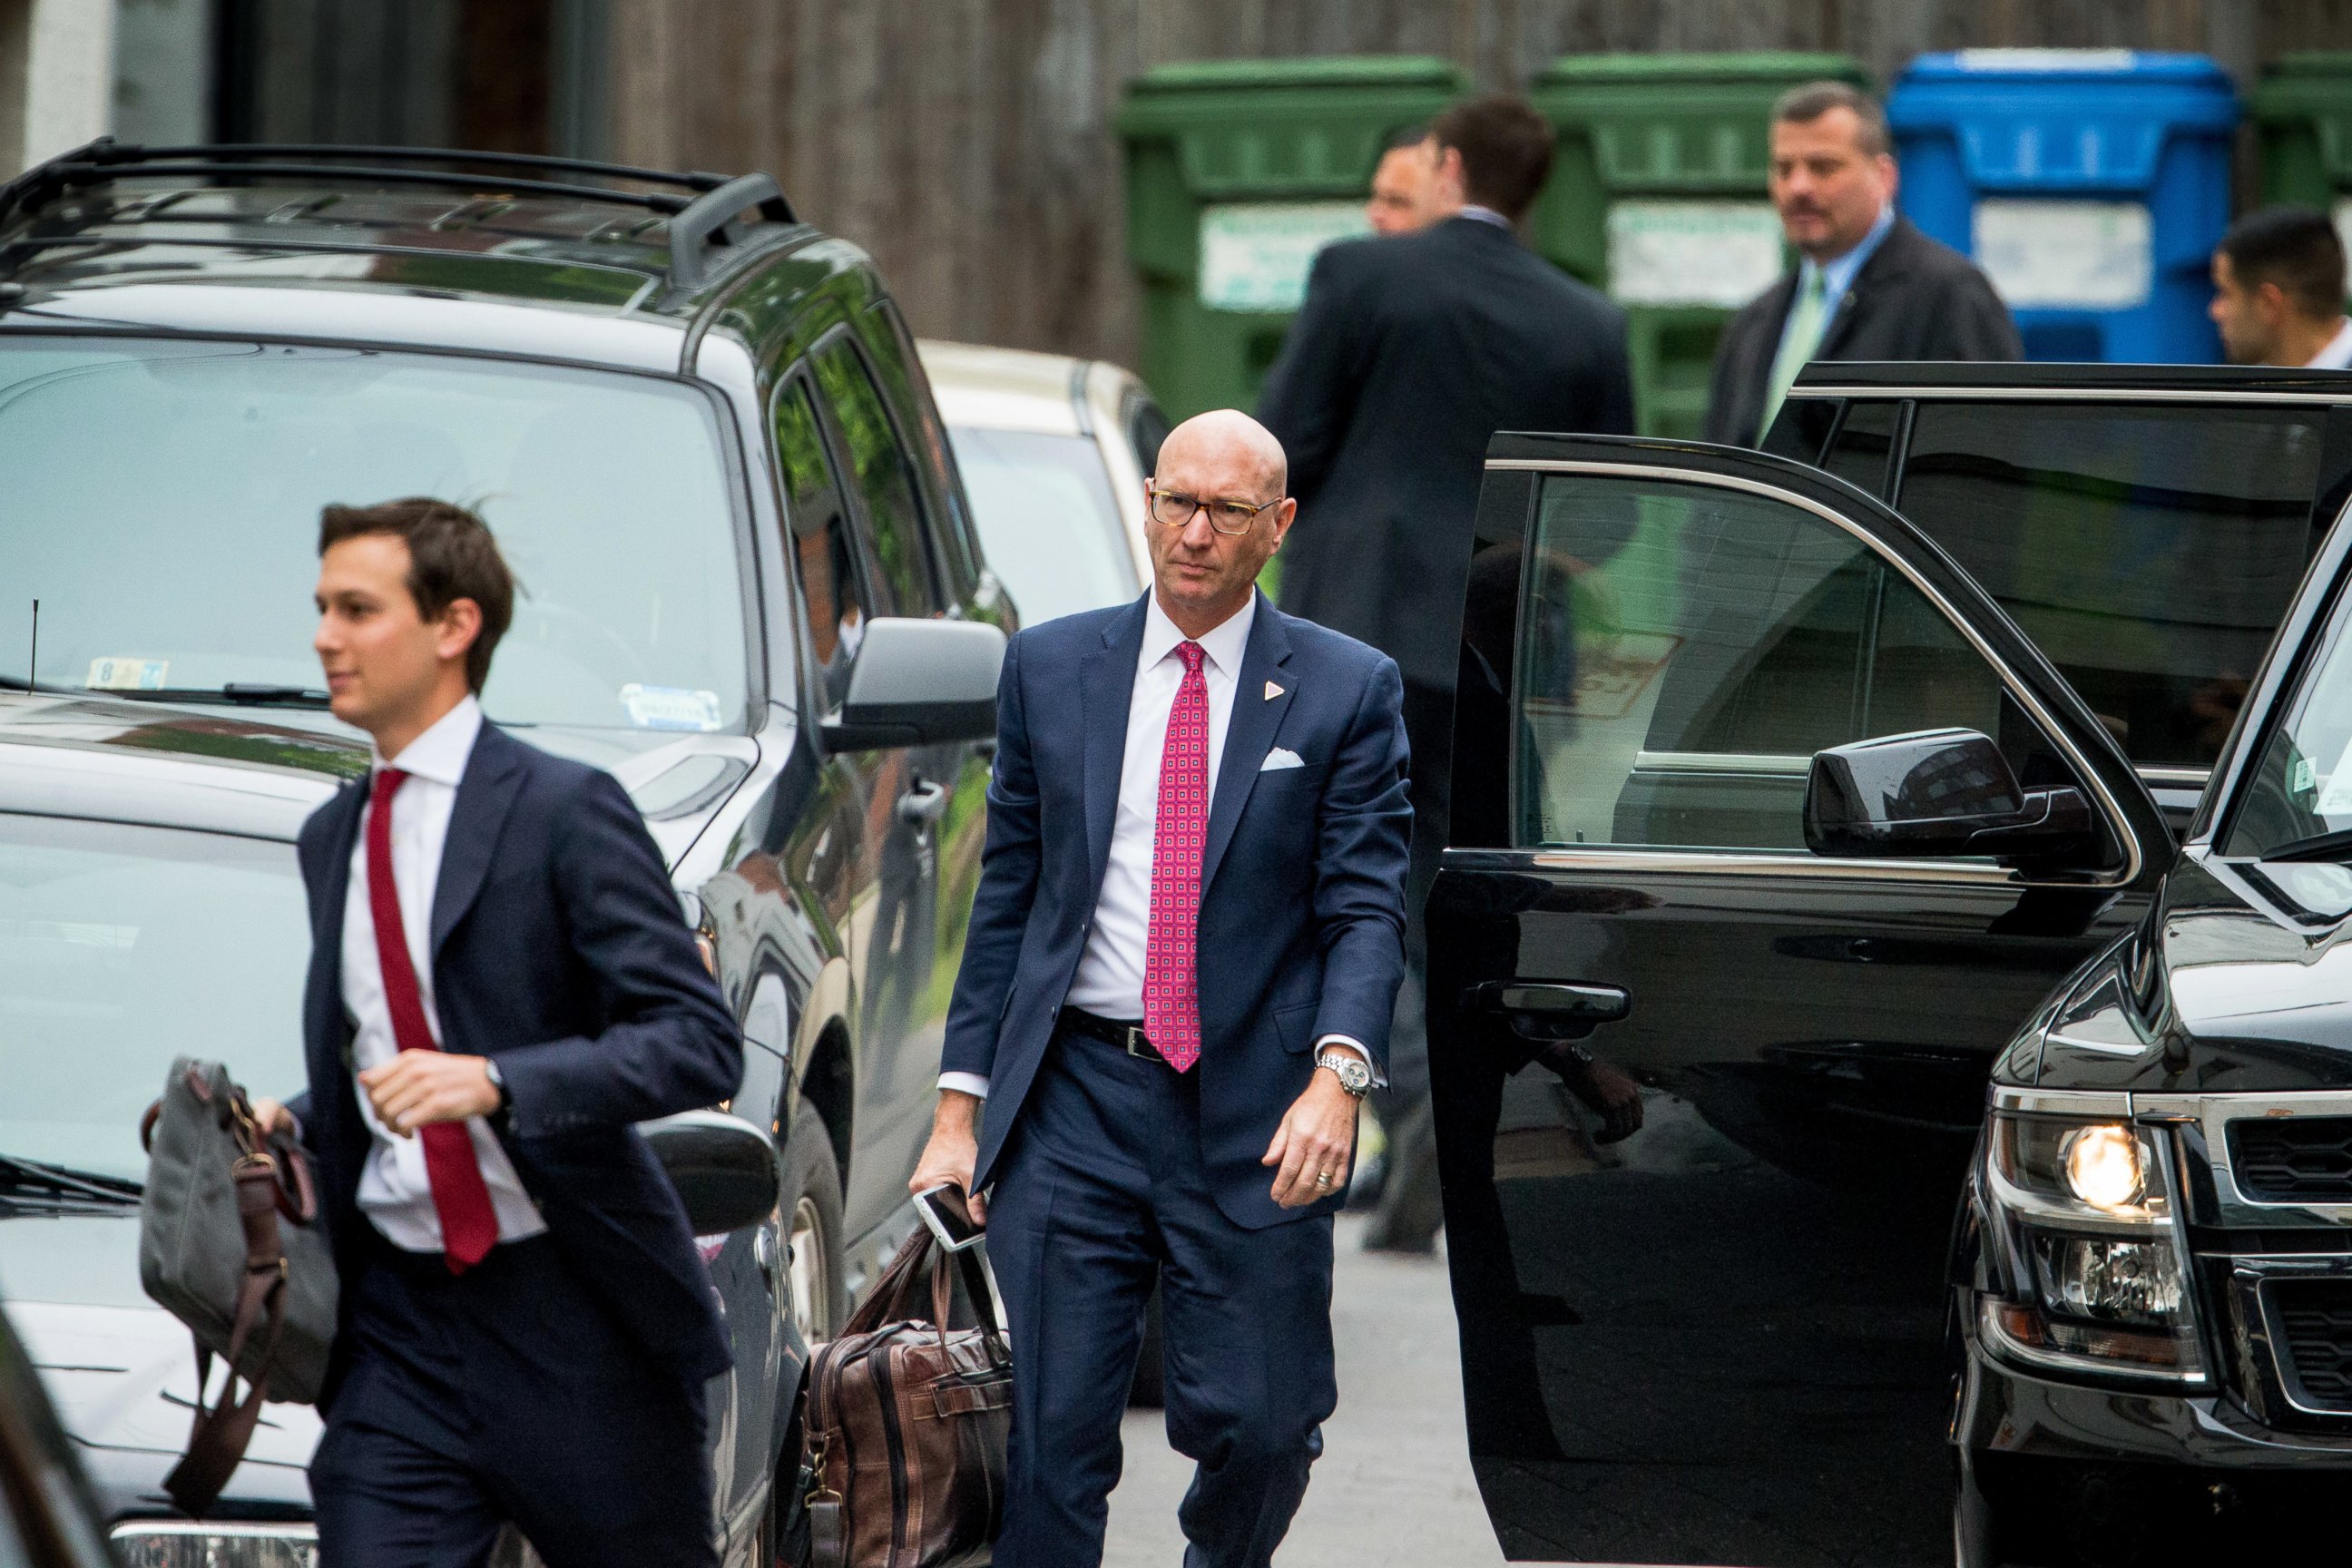 PHOTO: In this file photo, Donald Trump's then-deputy campaign manager Michael Glassner, center, arrives for a meeting with Paul Ryan at Republican National Committee Headquarters on Capitol Hill in Washington on May 12, 2016.